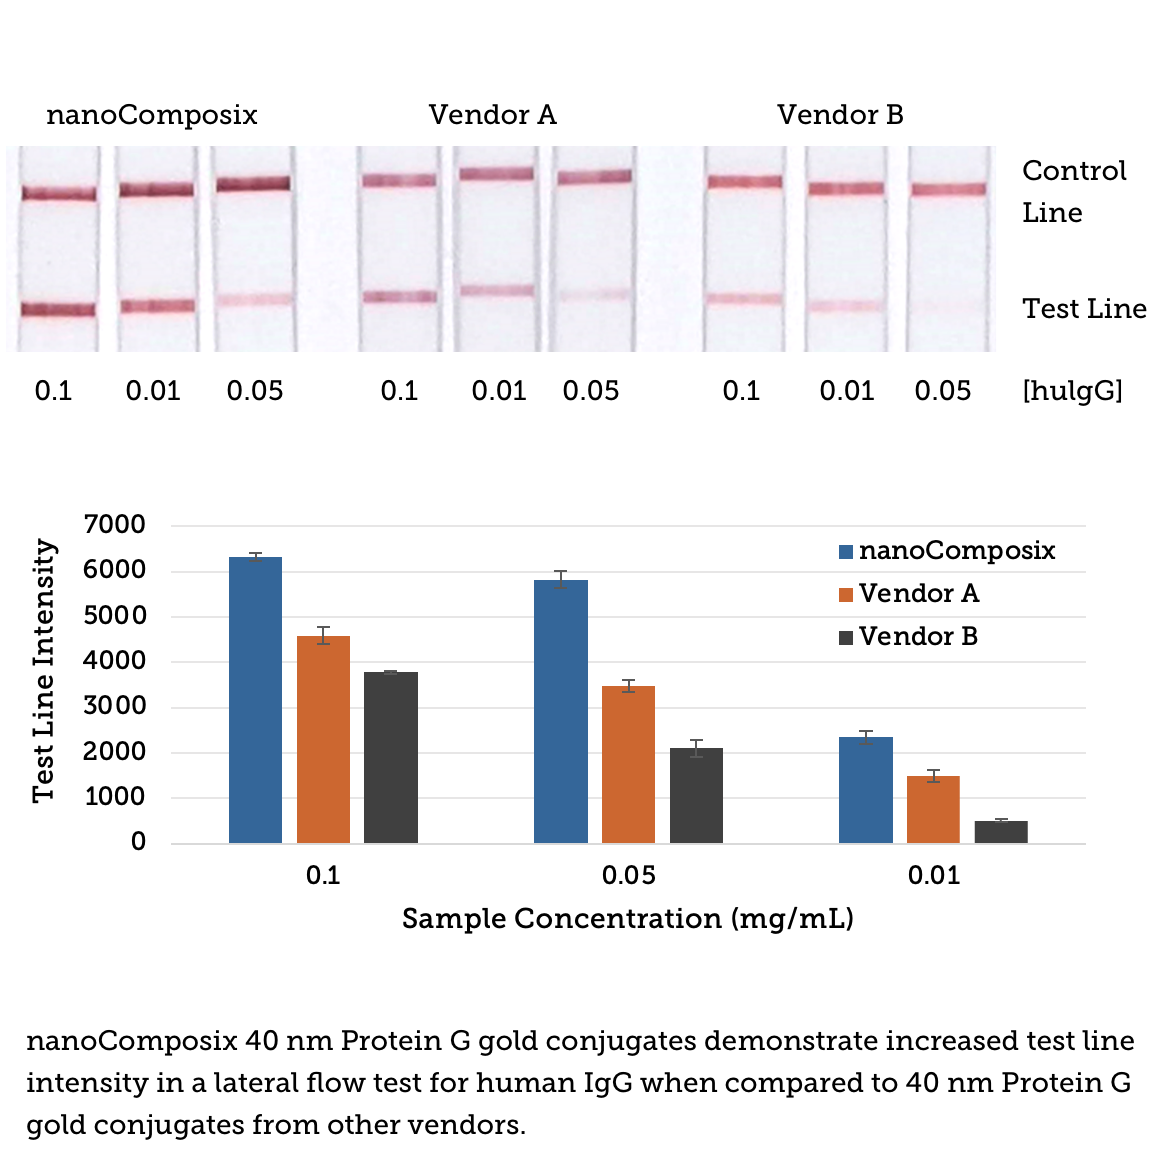 nanoComposix 40 nm Protein G gold conjugates demonstrate increased test line intensity in a lateral flow test for human IgG when compared to 40 nm Protein G gold conjugates from other vendors.